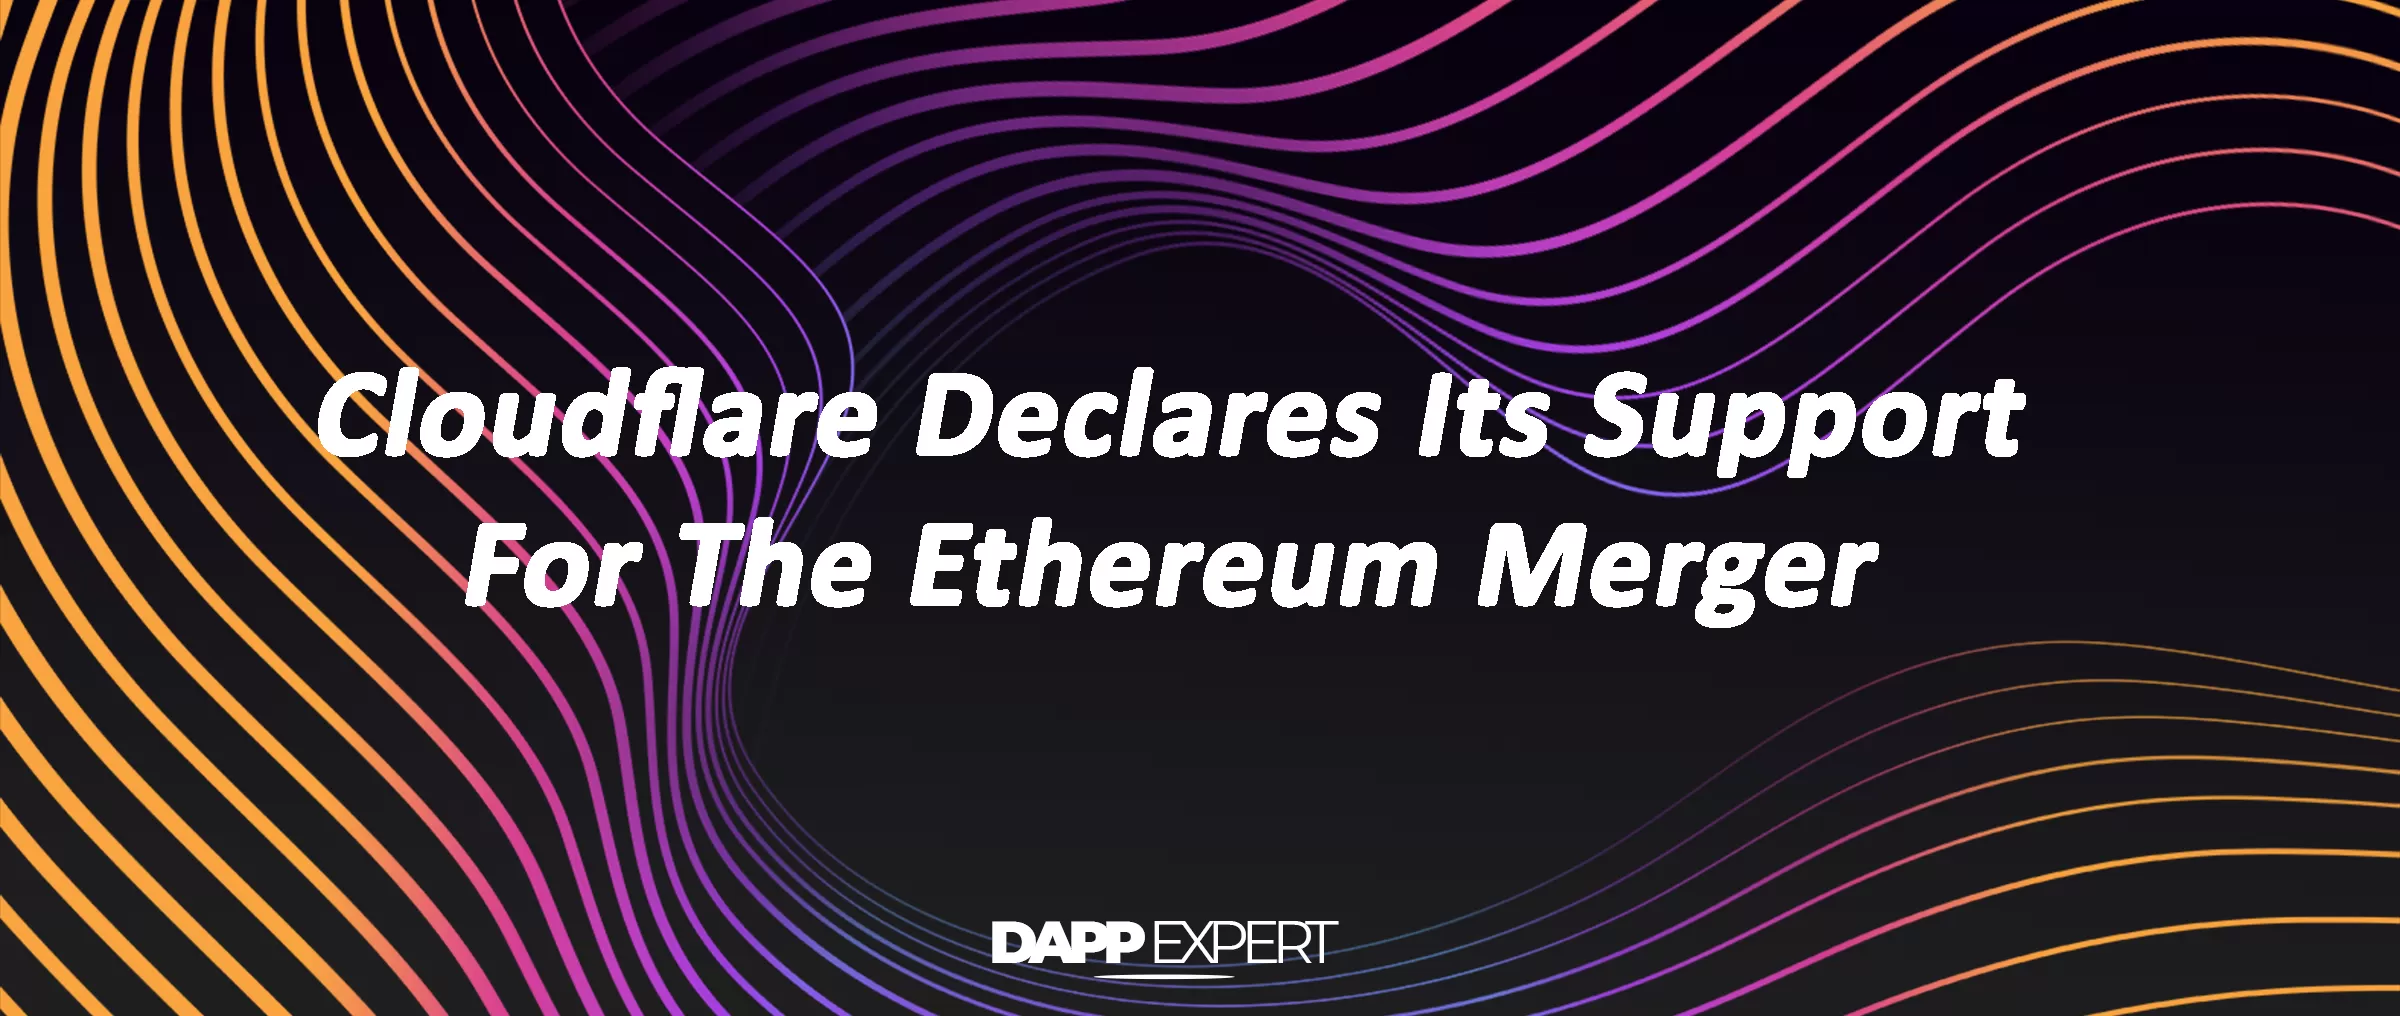 Cloudflare Declares Its Support For The Ethereum Merger